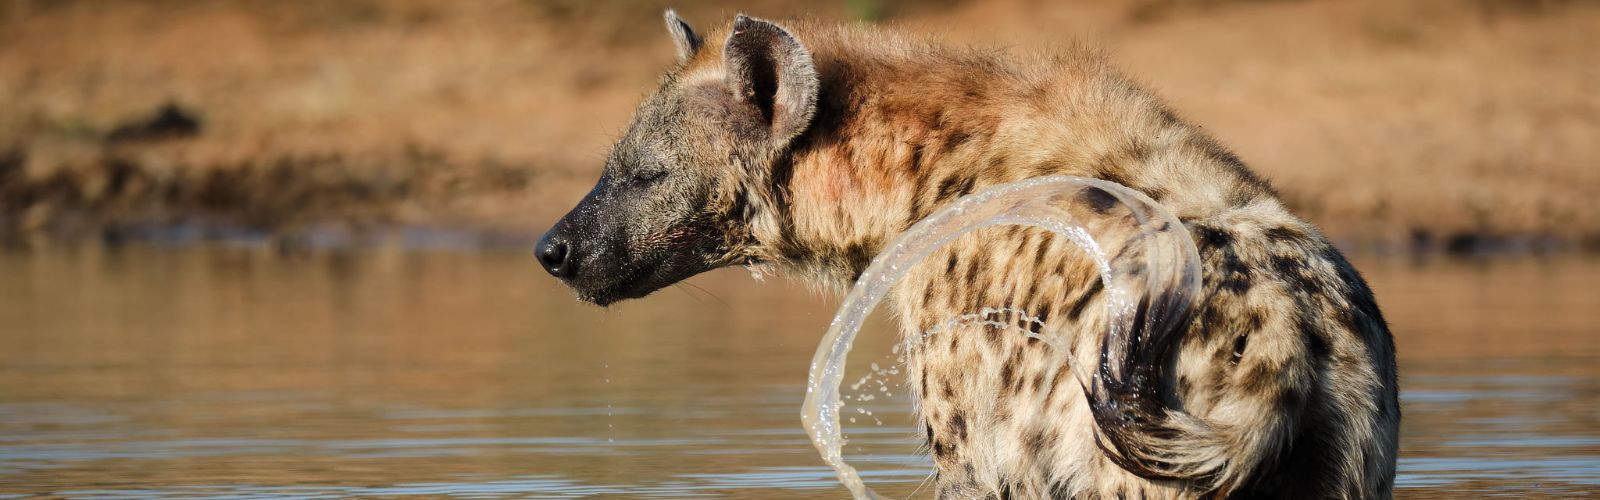 What to Expect from Photo Safaris in South Africa